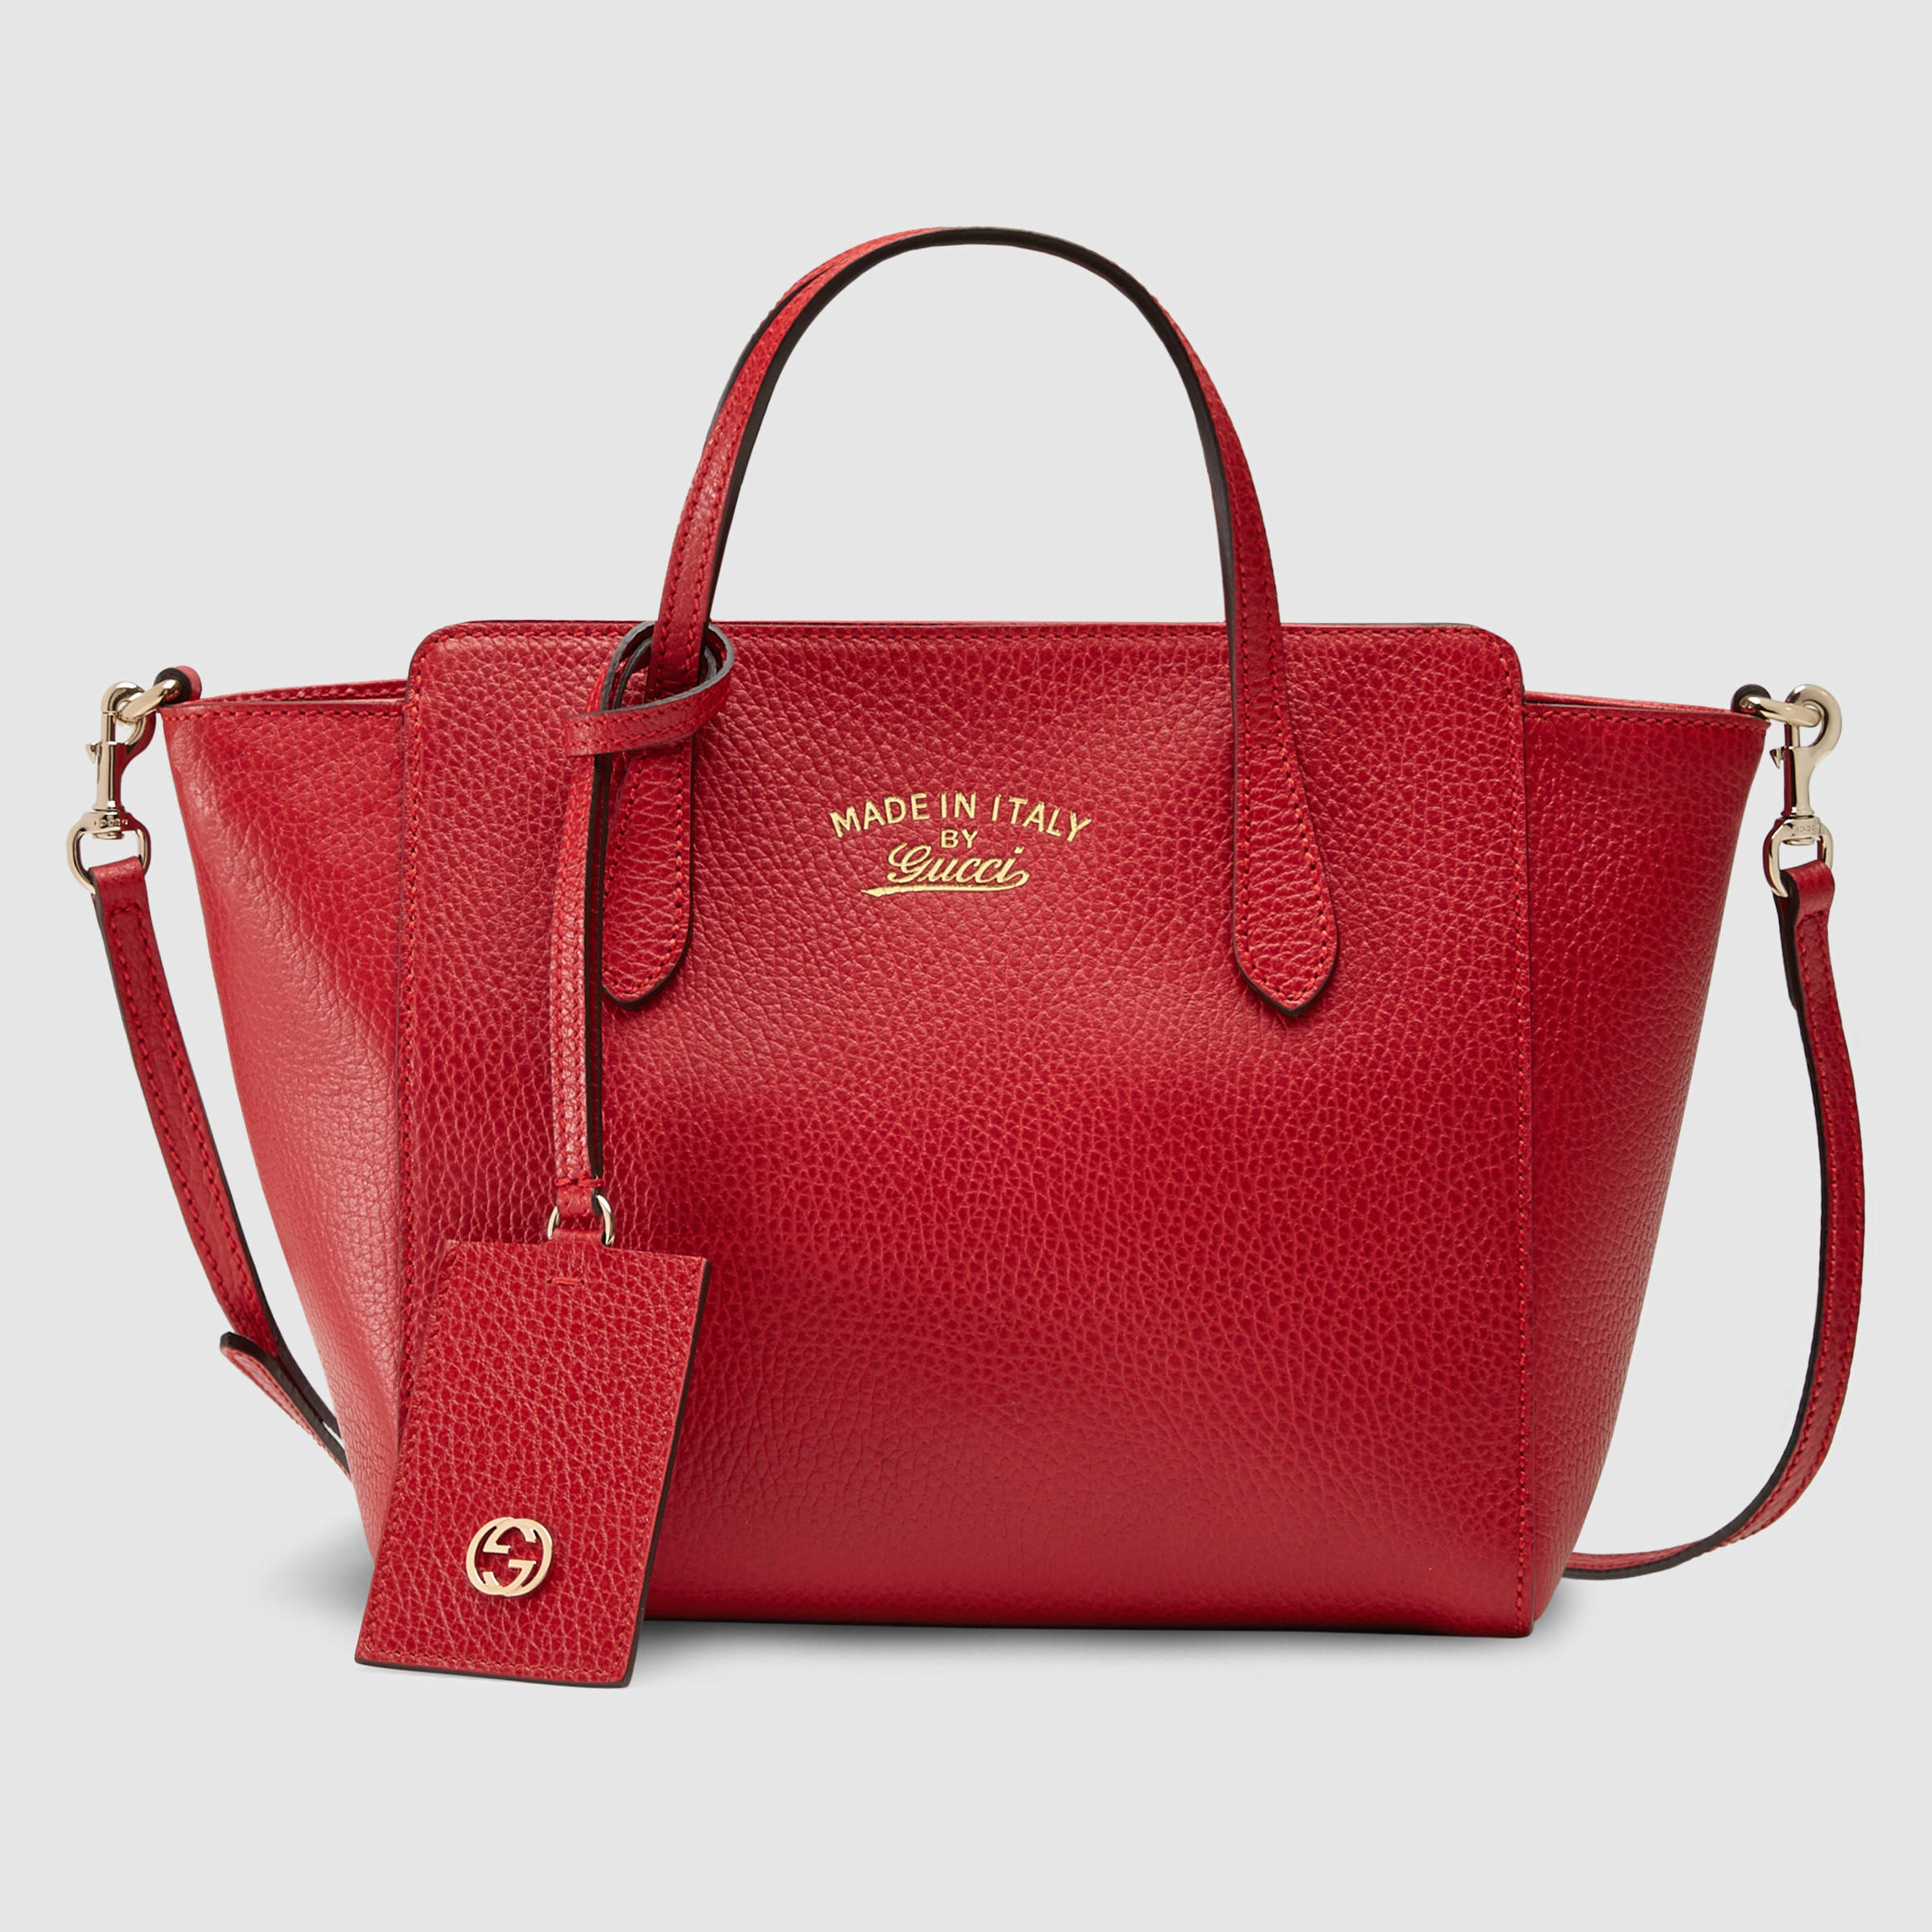 Gucci Swing Leather Tote Bag | IUCN Water